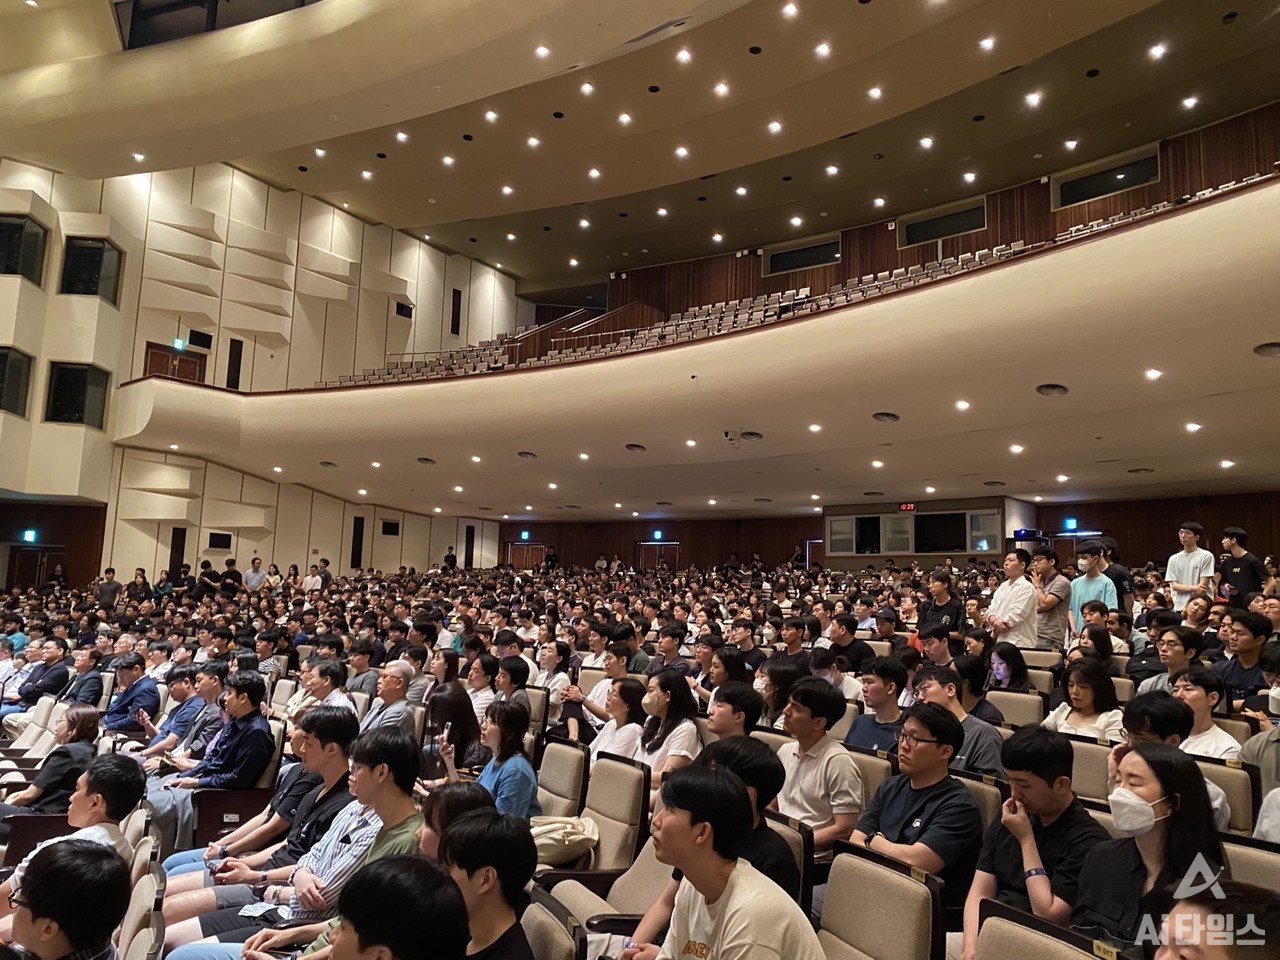 The audience gathered to participate in the question-and-answer session.  You can also see people lined up on both sides to participate in the question and answer session. 